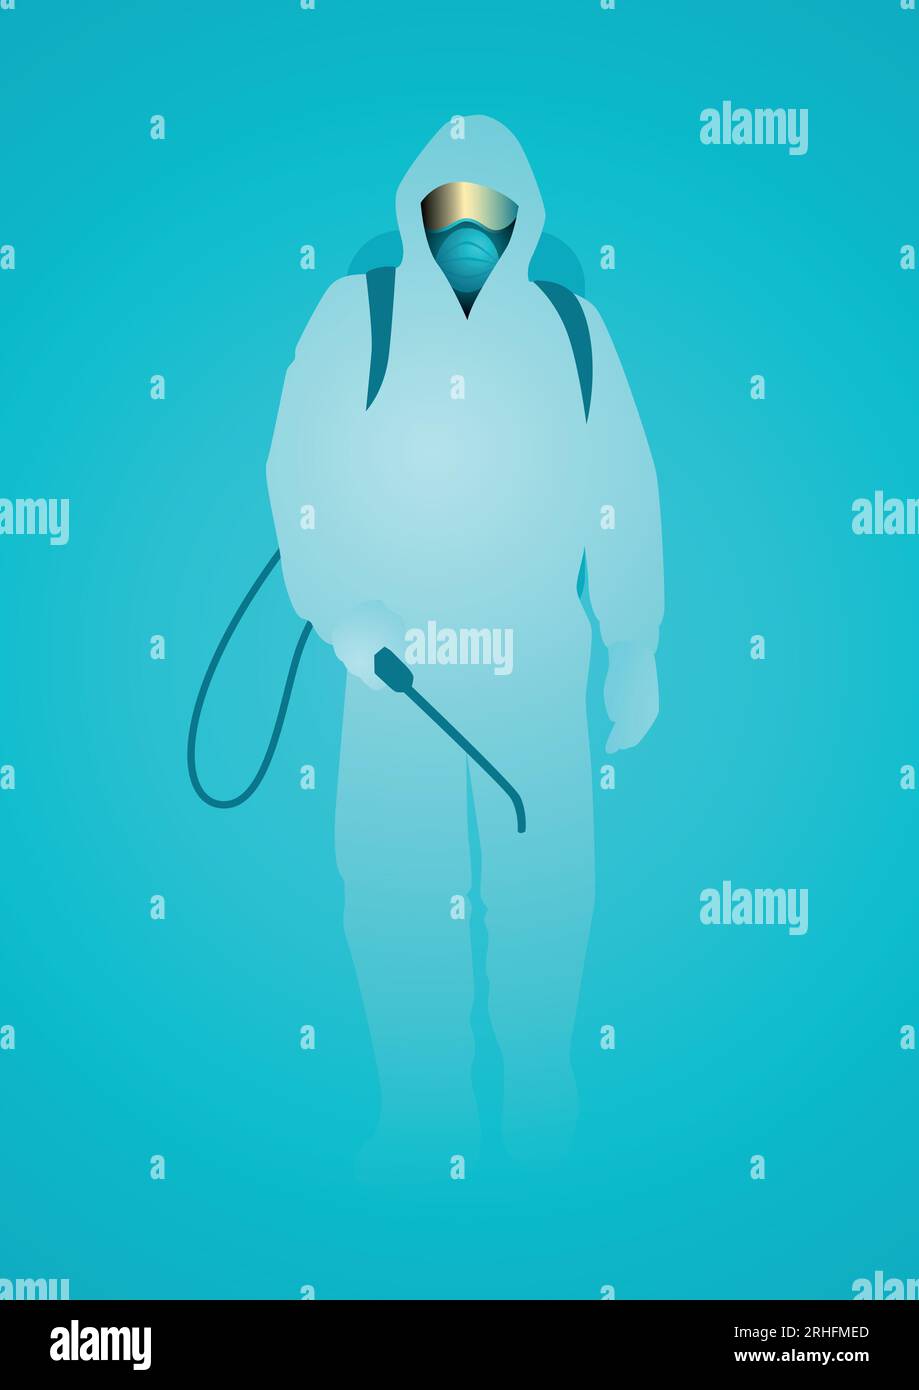 Vector illustration of a man in hazmat suit spraying disinfectant to ...